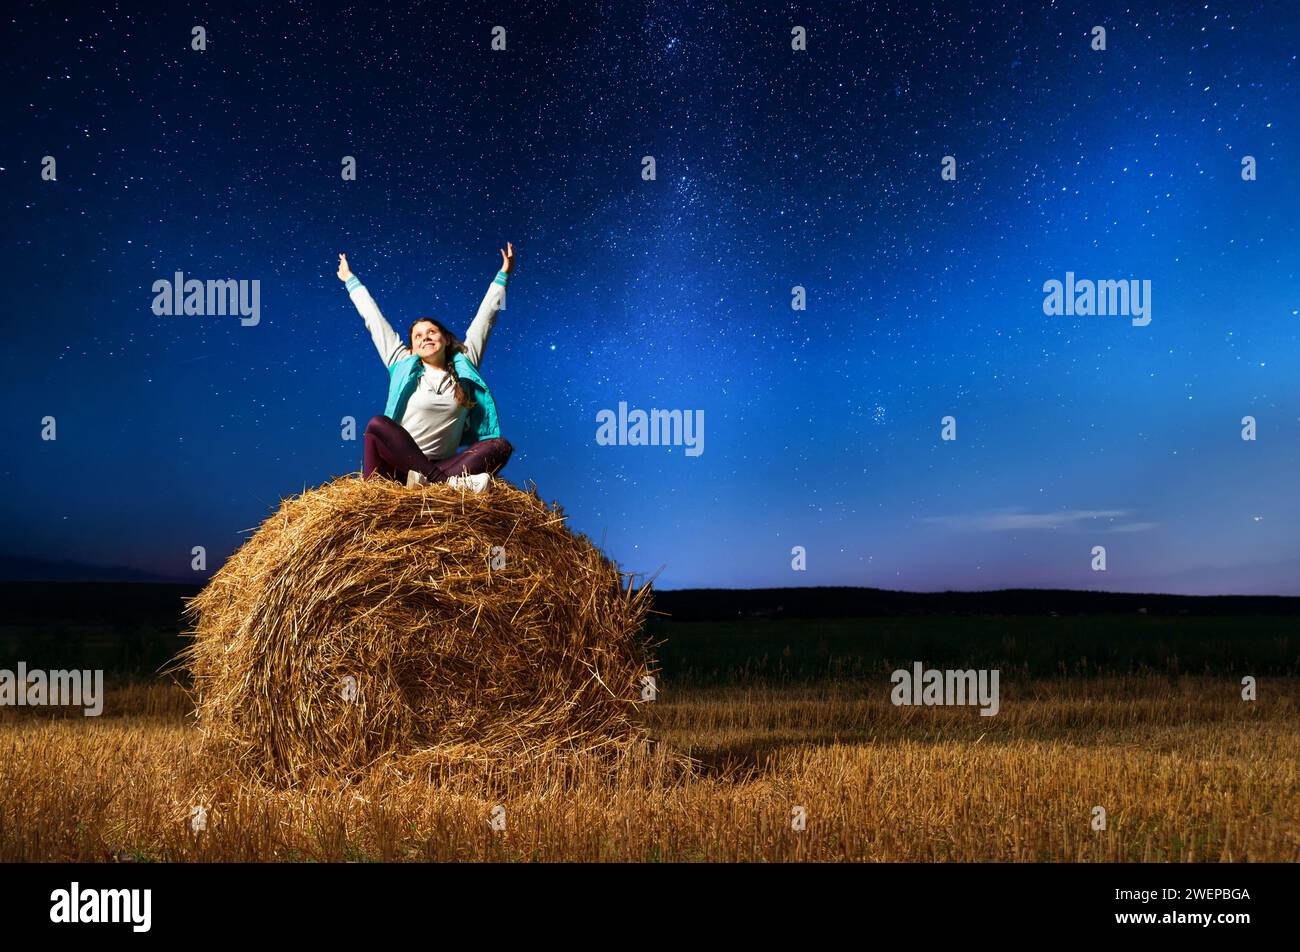 Young happy girl with raised arms sits on a round haystack in a field against the background of the starry sky. Night landscape of the starry sky with Stock Photo